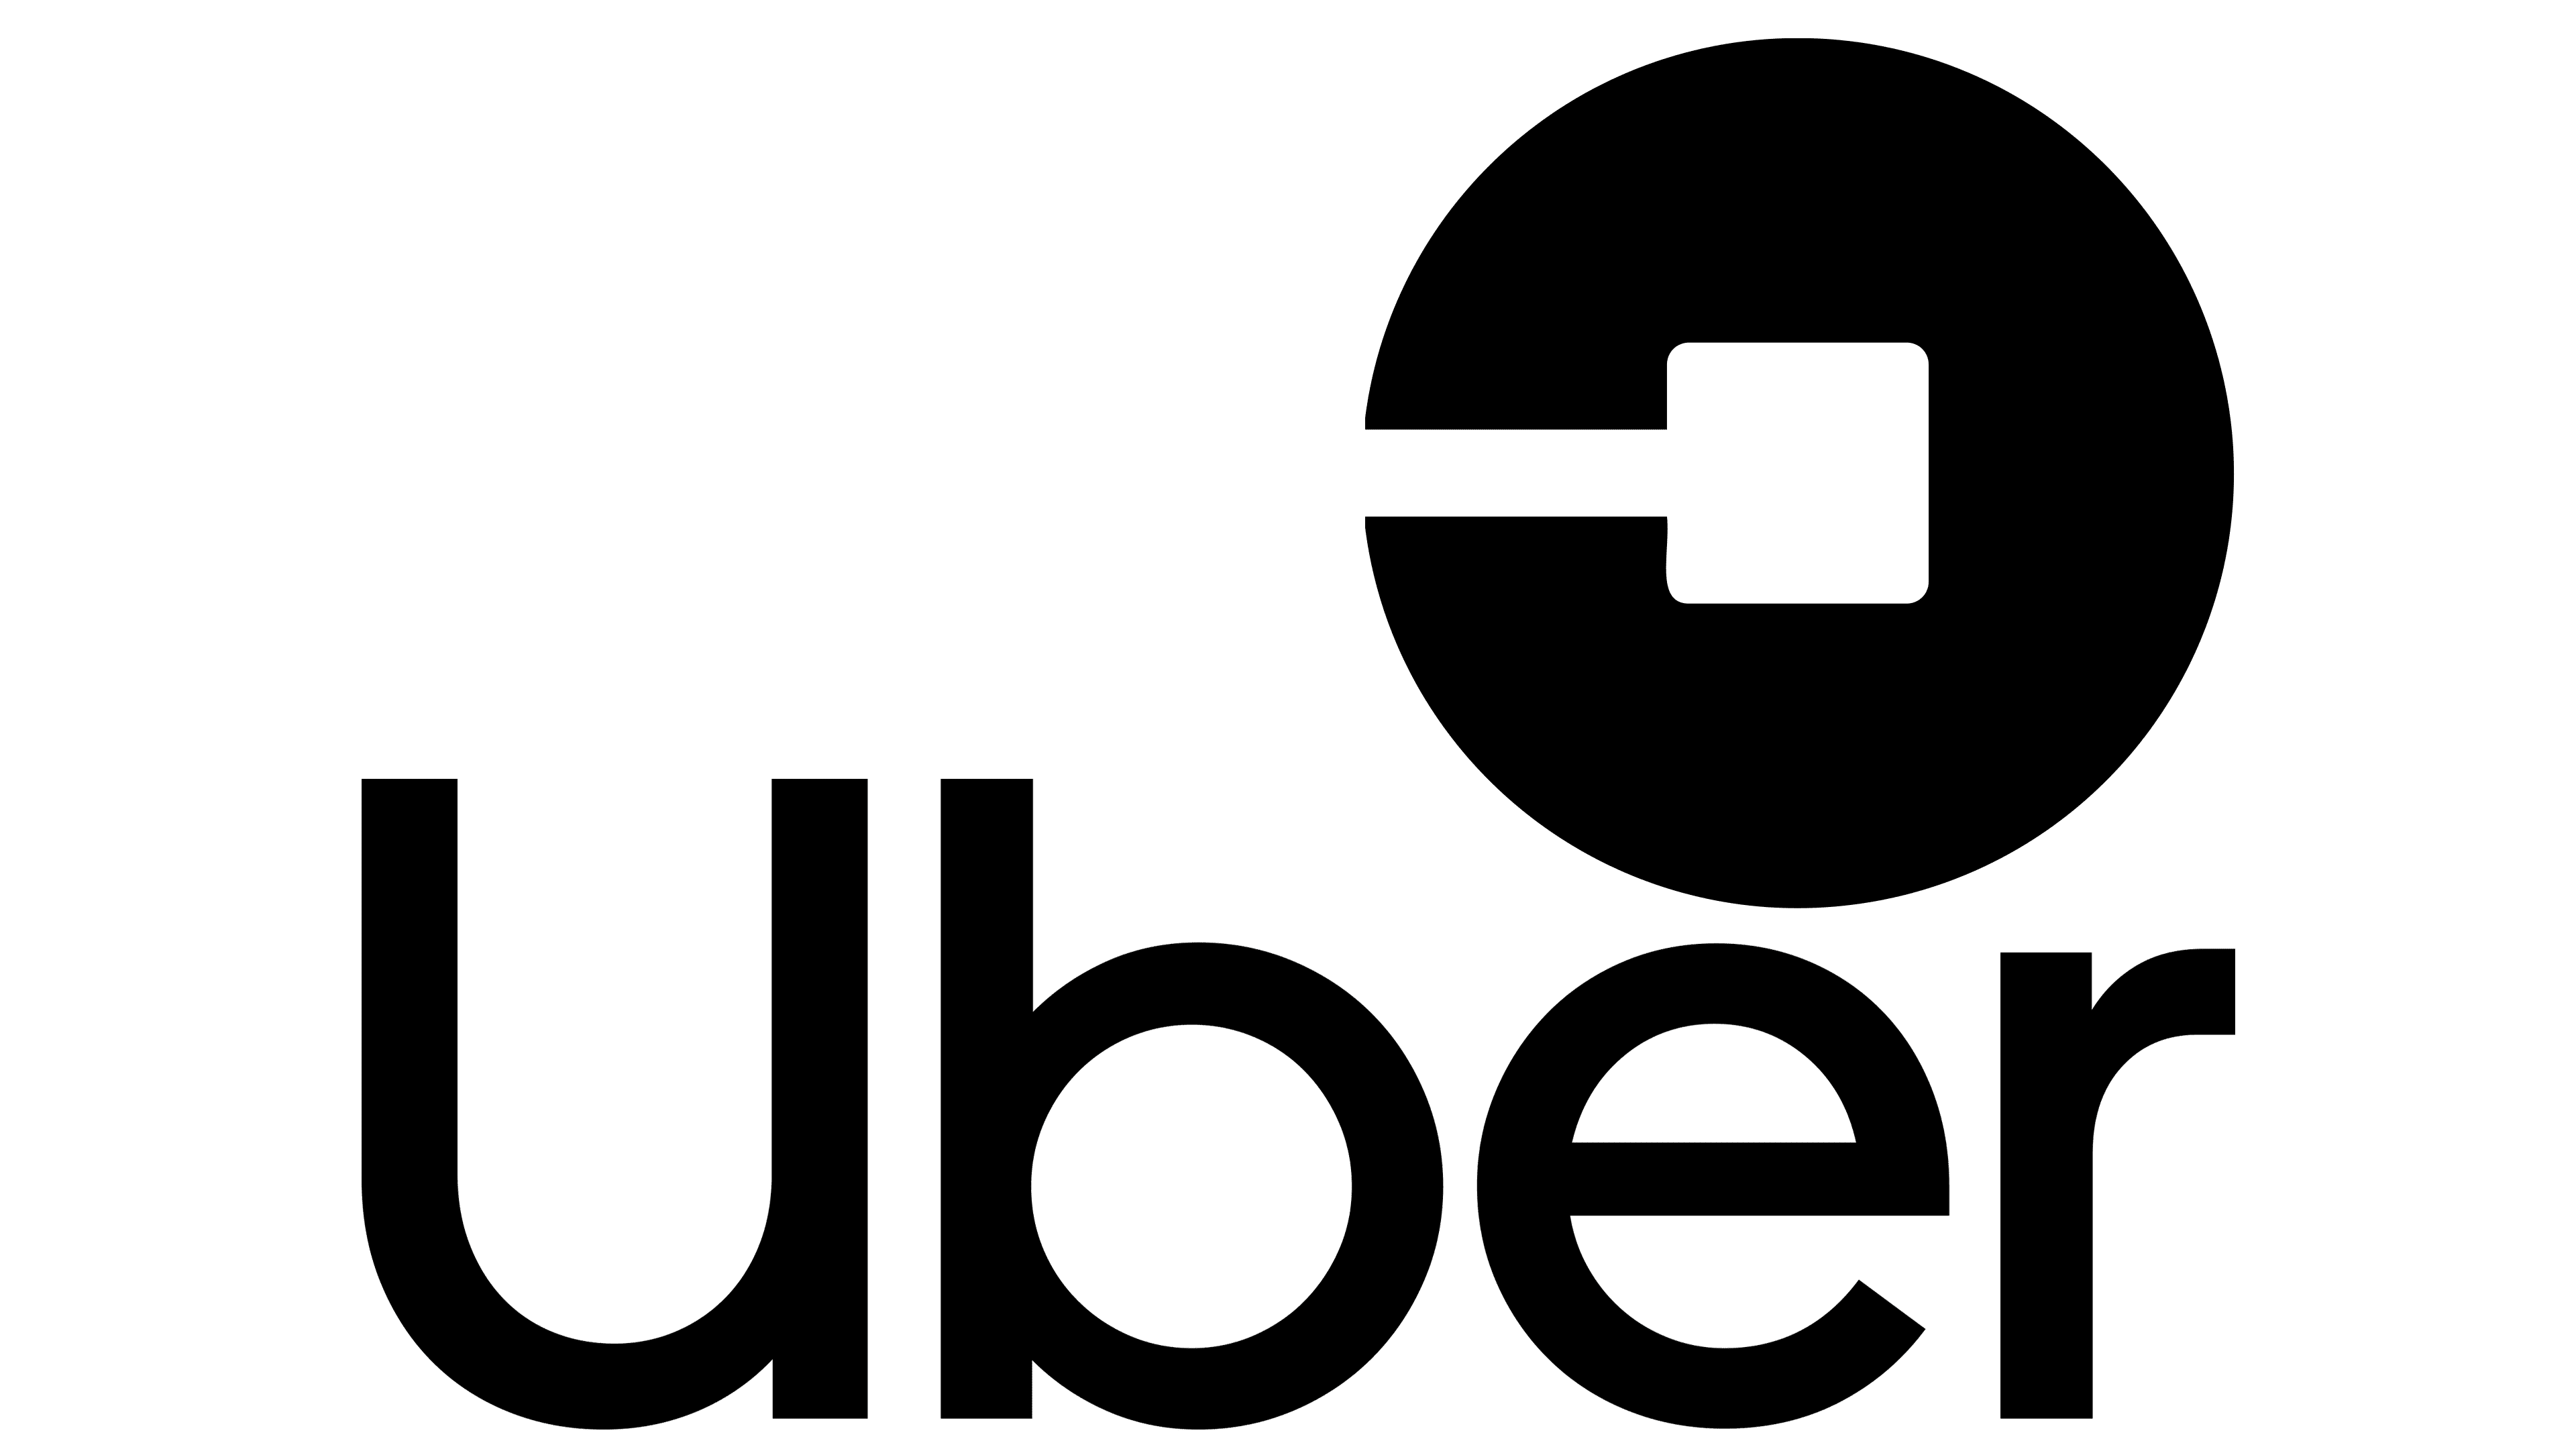 Uber Logo History The Most Famous Brands And Company Logos In The World